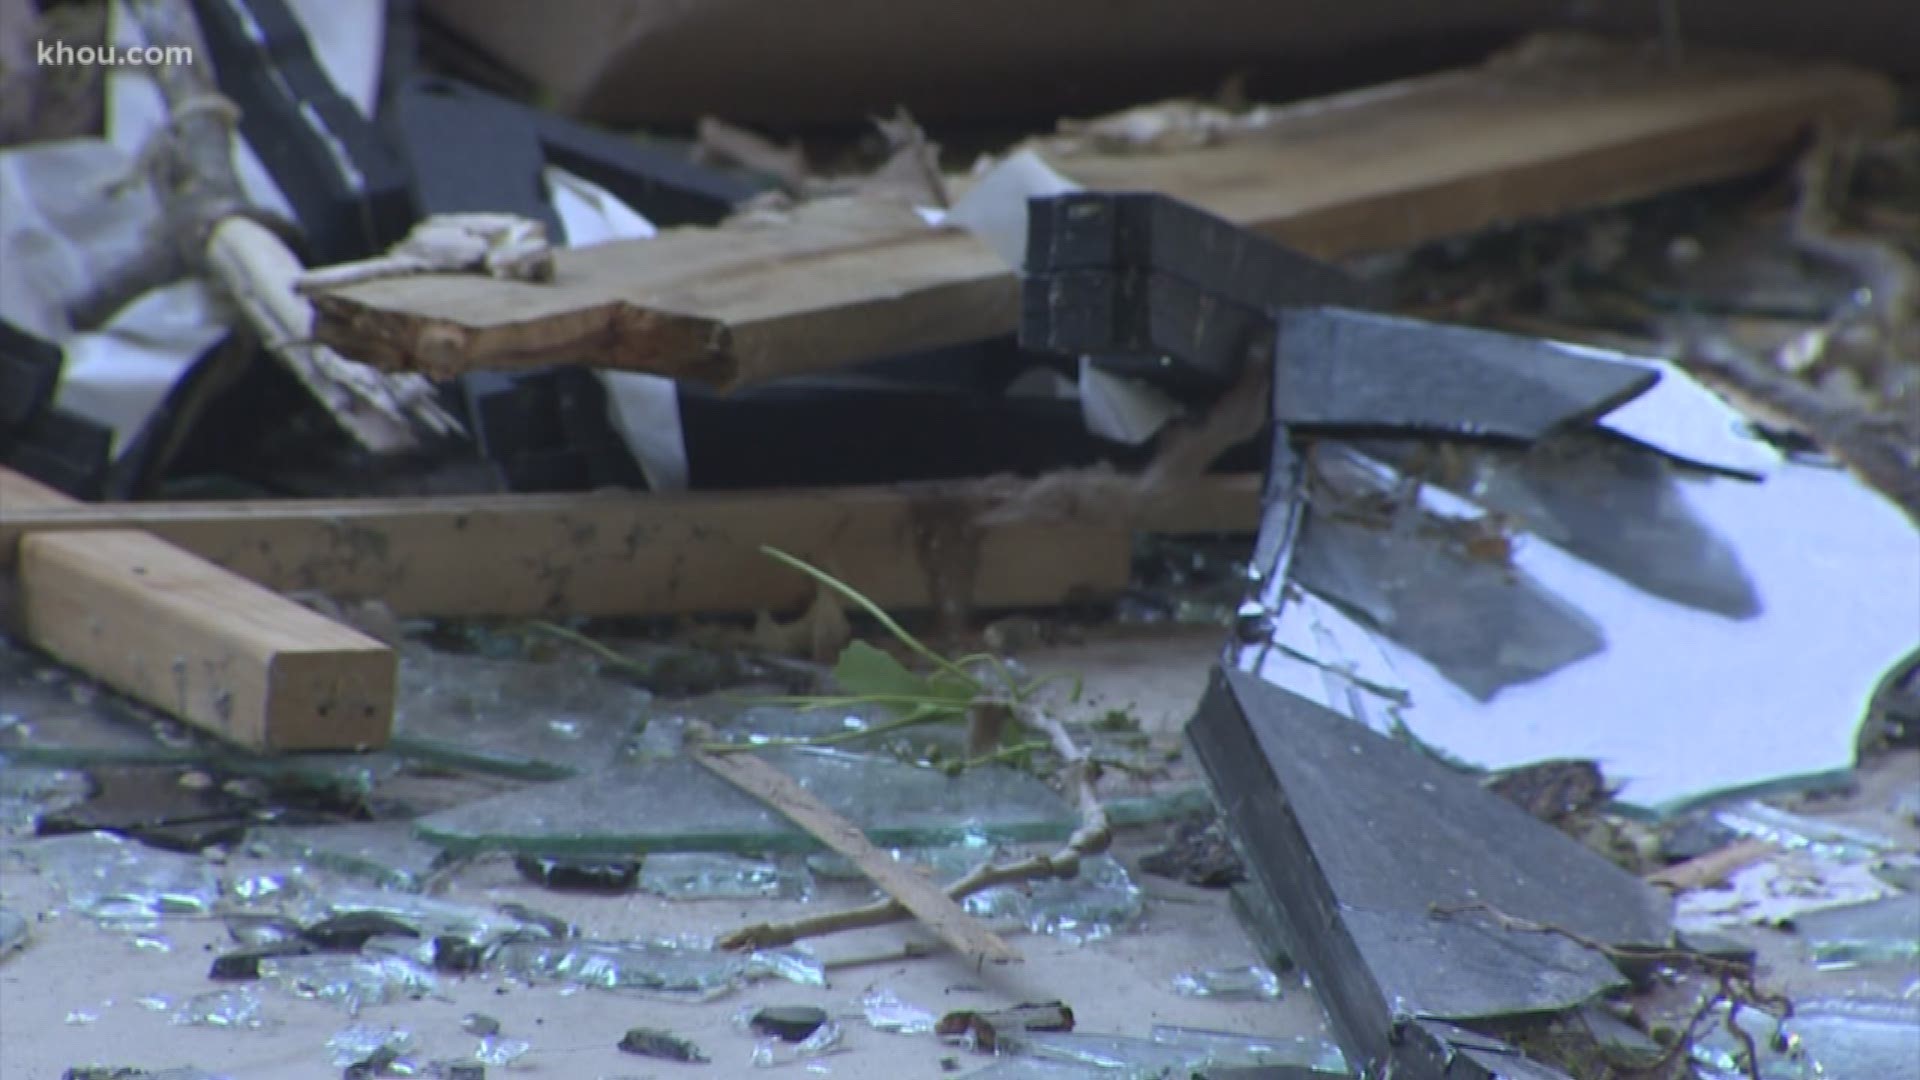 Worshipers at the St. Joseph Church of God in Christ had just moved into their brand new building when it was ripped to pieces by a tornado. The pastor says they're vowing to rebuild.